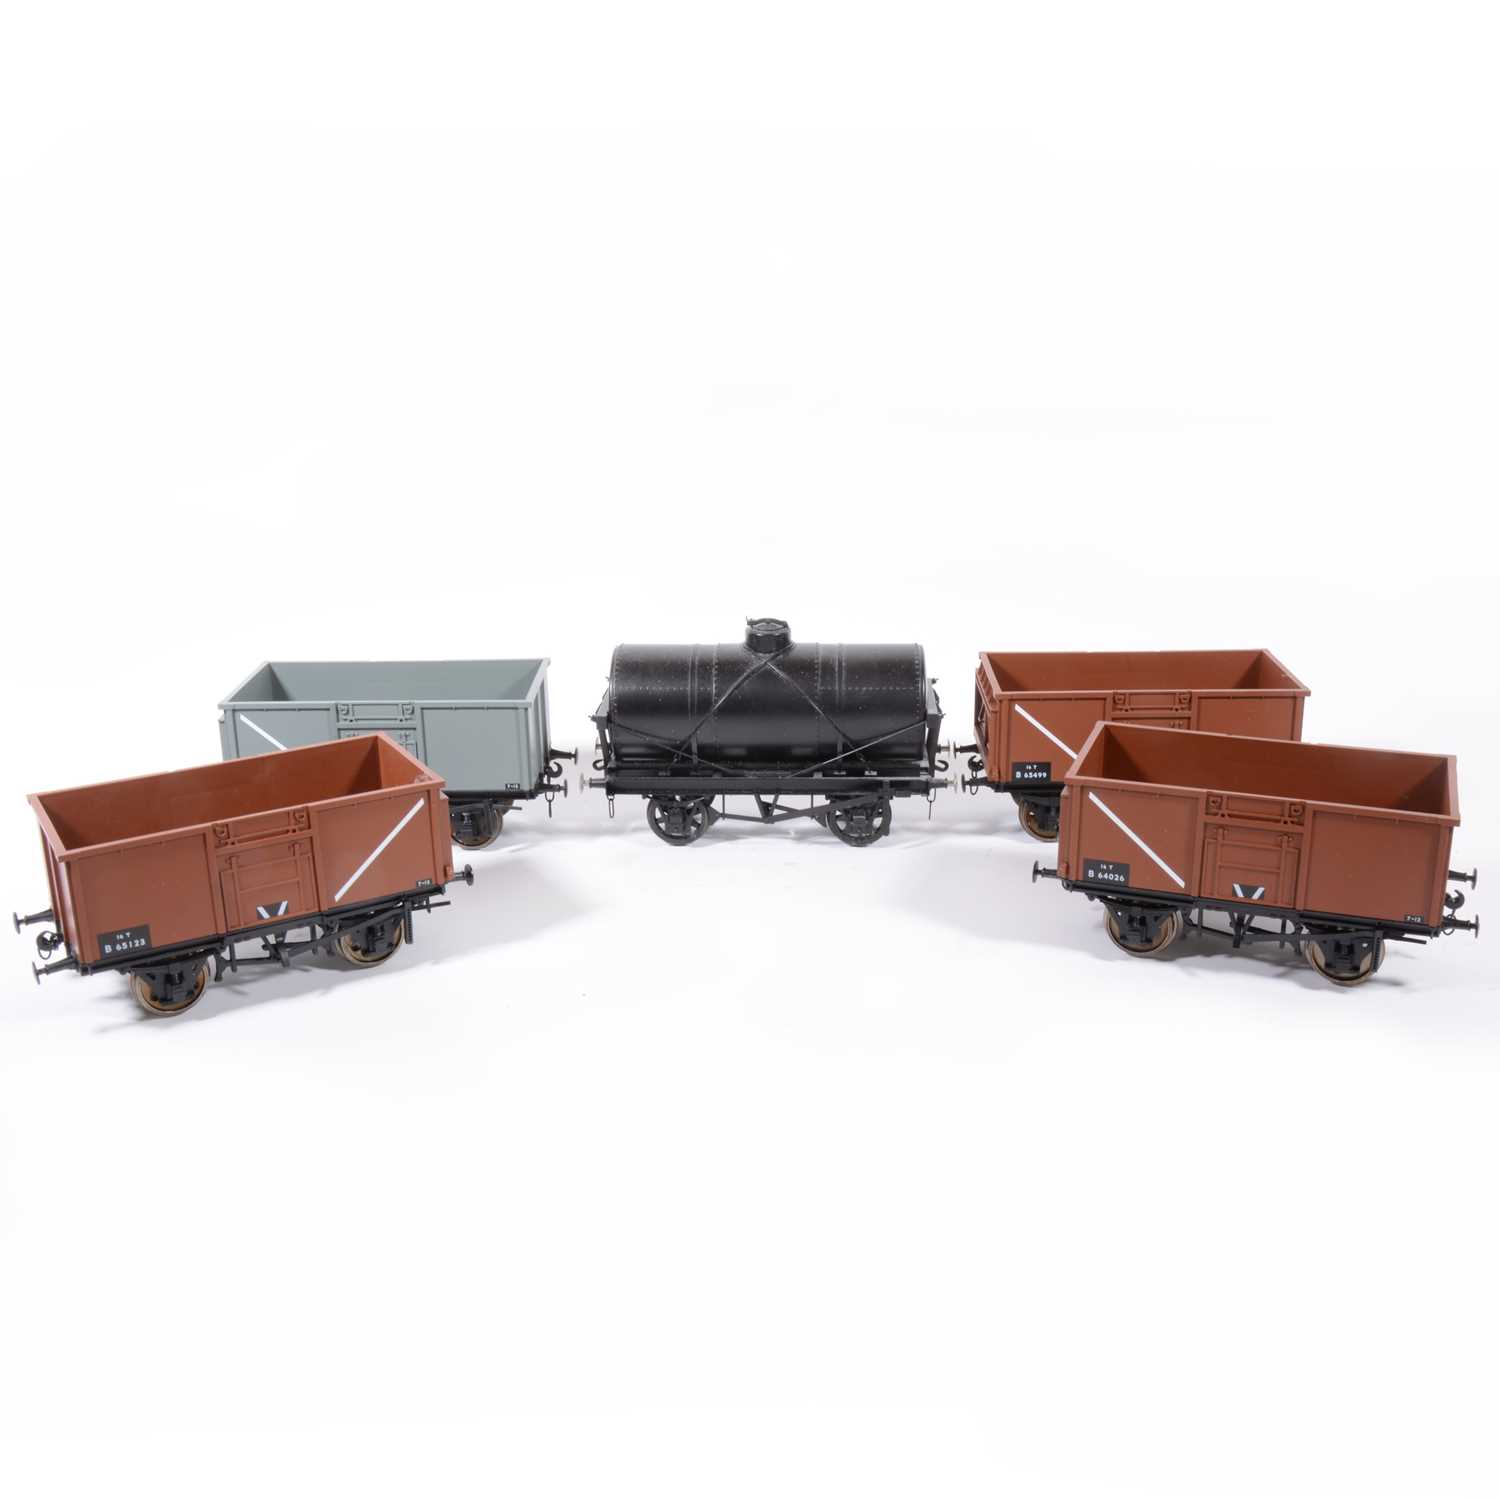 Lot 75 - Nine Accucraft gauge 1 / G scale, 45mm, open wagons, rolling stock and tanker, (9).